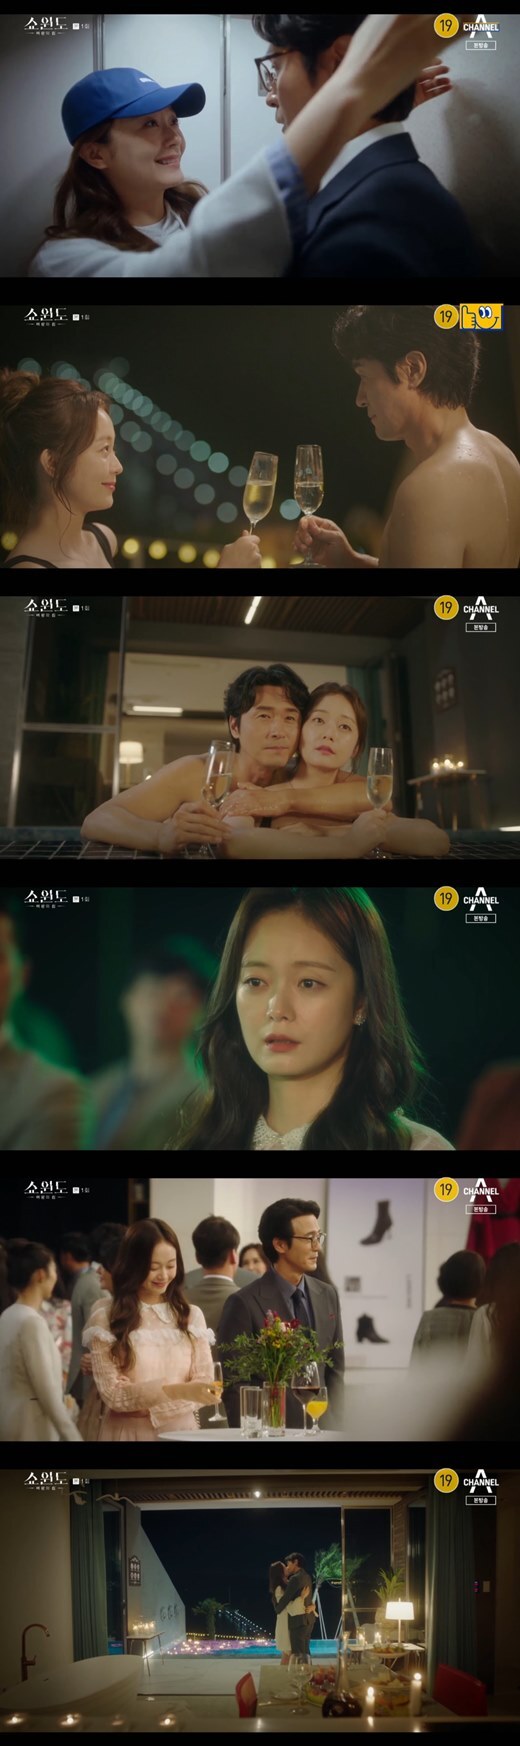 Showwindow: The Queens House Song Yoon-ah, Lee Sung-jae and Jeon So-mins shocking relationship Dawn of the Planet of the Appearance has been unveiled.On the 29th, the comprehensive channel channel A New Moonwha Drama Showwindow: The Queens House (playplayplayed by Han Bo-kyung, directed by Park Hye-young, directed by Kangsol Park Dae-hee) was first broadcast.Showwindow: The Queens House began with the appearance of a happy couple, with Han Sun-joo (Song Yoon-ah) and Shin Myung-seop (Lee Sung-jae) expressing affection toward each other.However, Shin had a surprise meeting with Yoon Mi-ra on a business trip. Yoon Mi-ra kissed Shin Myung-seop, saying, Its fun and fun.Shin Myung-seop had gone on a farewell trip with Yoon Mi-ra, which Myeong-seop planned at the same time as his business trip. They had promised to lets just love for one year.Yoon Mi-ra said to Shin Myung-seop, You should never throw away your family. I am so unhappy if you are not happy. Shin Myung-seop said, Its wonderful.We are a mummy, Yoon Mi-ra said. For our beautiful farewell trip alone.Then, a brand launch show by Shin Myung-seop was held, and a Guddu was released, and Yoon Mi-ra was surprised because it was Guddu that she designed.After that, Shin Myung-seop met Yoon Mi-ra, who came to the brand launch show, and said, How did it go? My gift.Then he whispered to Yoon Mi-ra, You are always the queen to me.After that, Han Seon-ju appeared, and Yoon Mi-ra left. Han Seon-ju told Shin Myung-seop, The launching show was cool. Shin Myung-seop praised Han Seon-ju, saying, The idea is what you gave.After returning to his quarters, Shin Myung-seop met Yoon Mi-ra after telling Han Seon-ju that he had work to do, and Shin Myung-seop and Yoon Mi-ra spent their time alone, and Han Sun-ju thought alone in a room without a husband.Han was traveling alone because of her husband Shin Myung-seops busy schedule. Yoon Mi-ra was also watching alone.The two men had their first meeting, picking up the hat of Yoon Mi-ra, who was blown by the wind.Since then, they have met by chance at a travel destination. Yoon Mi-ra suggested to Han Sun-joo, who is taking a picture alone, I will take a picture. Han Sun-joo also took a picture of Yoon Mi-ra.Han and Yunmira were reunited again, and Yoonmira helped Han Sun-ju, who was in trouble because of the oil from the rental car.Han Seon-ju said she followed her husbands business trip and Yoon Mi-ra came with her boyfriend. Han Seon-ju offered dinner saying, Thank you so much today.However, Yoon Mi-ra left his wallet in a rental car and could not calculate it, so Yoon Mi-ra calculated it instead.Han Seon-ju said, I asked for a contact, but Yoon Mi-ra refused, saying, I made fun memories thanks to my travel mate. Han Sun-joo said to Yoon Mi-ra, I will keep this grace for the rest of my life.When Han returned to the hostel, he found a note from her husband, Shin Myung-seop, saying, Im sorry I cant stay with you. At that time, Shin Myung-seop was enjoying a ship date with Yoon Mi-ra.He presented Yoon Mi-ra with a red Guddu.The next day, Shin Myung-seop presented Guddu, designed by Yoon Mi-ra, saying, You are the only Guddu you can wear. After that, Shin Myung-seop and Han Seon-ju arrived at the airport to return to Seoul.At that time, Shin Myung-seop was contacted that Yoon Mi-ra was in the emergency room. After Yoon Mi-ra tried to read it, he lost his mind.Shin Myung-seop was next to Yoon Mi-ra, who was alert. Yoon Mi-ra said, I didnt want to make it hard for you. So I tried to break up... Its right to break up...Shin embraced Yoon Mi-ra.